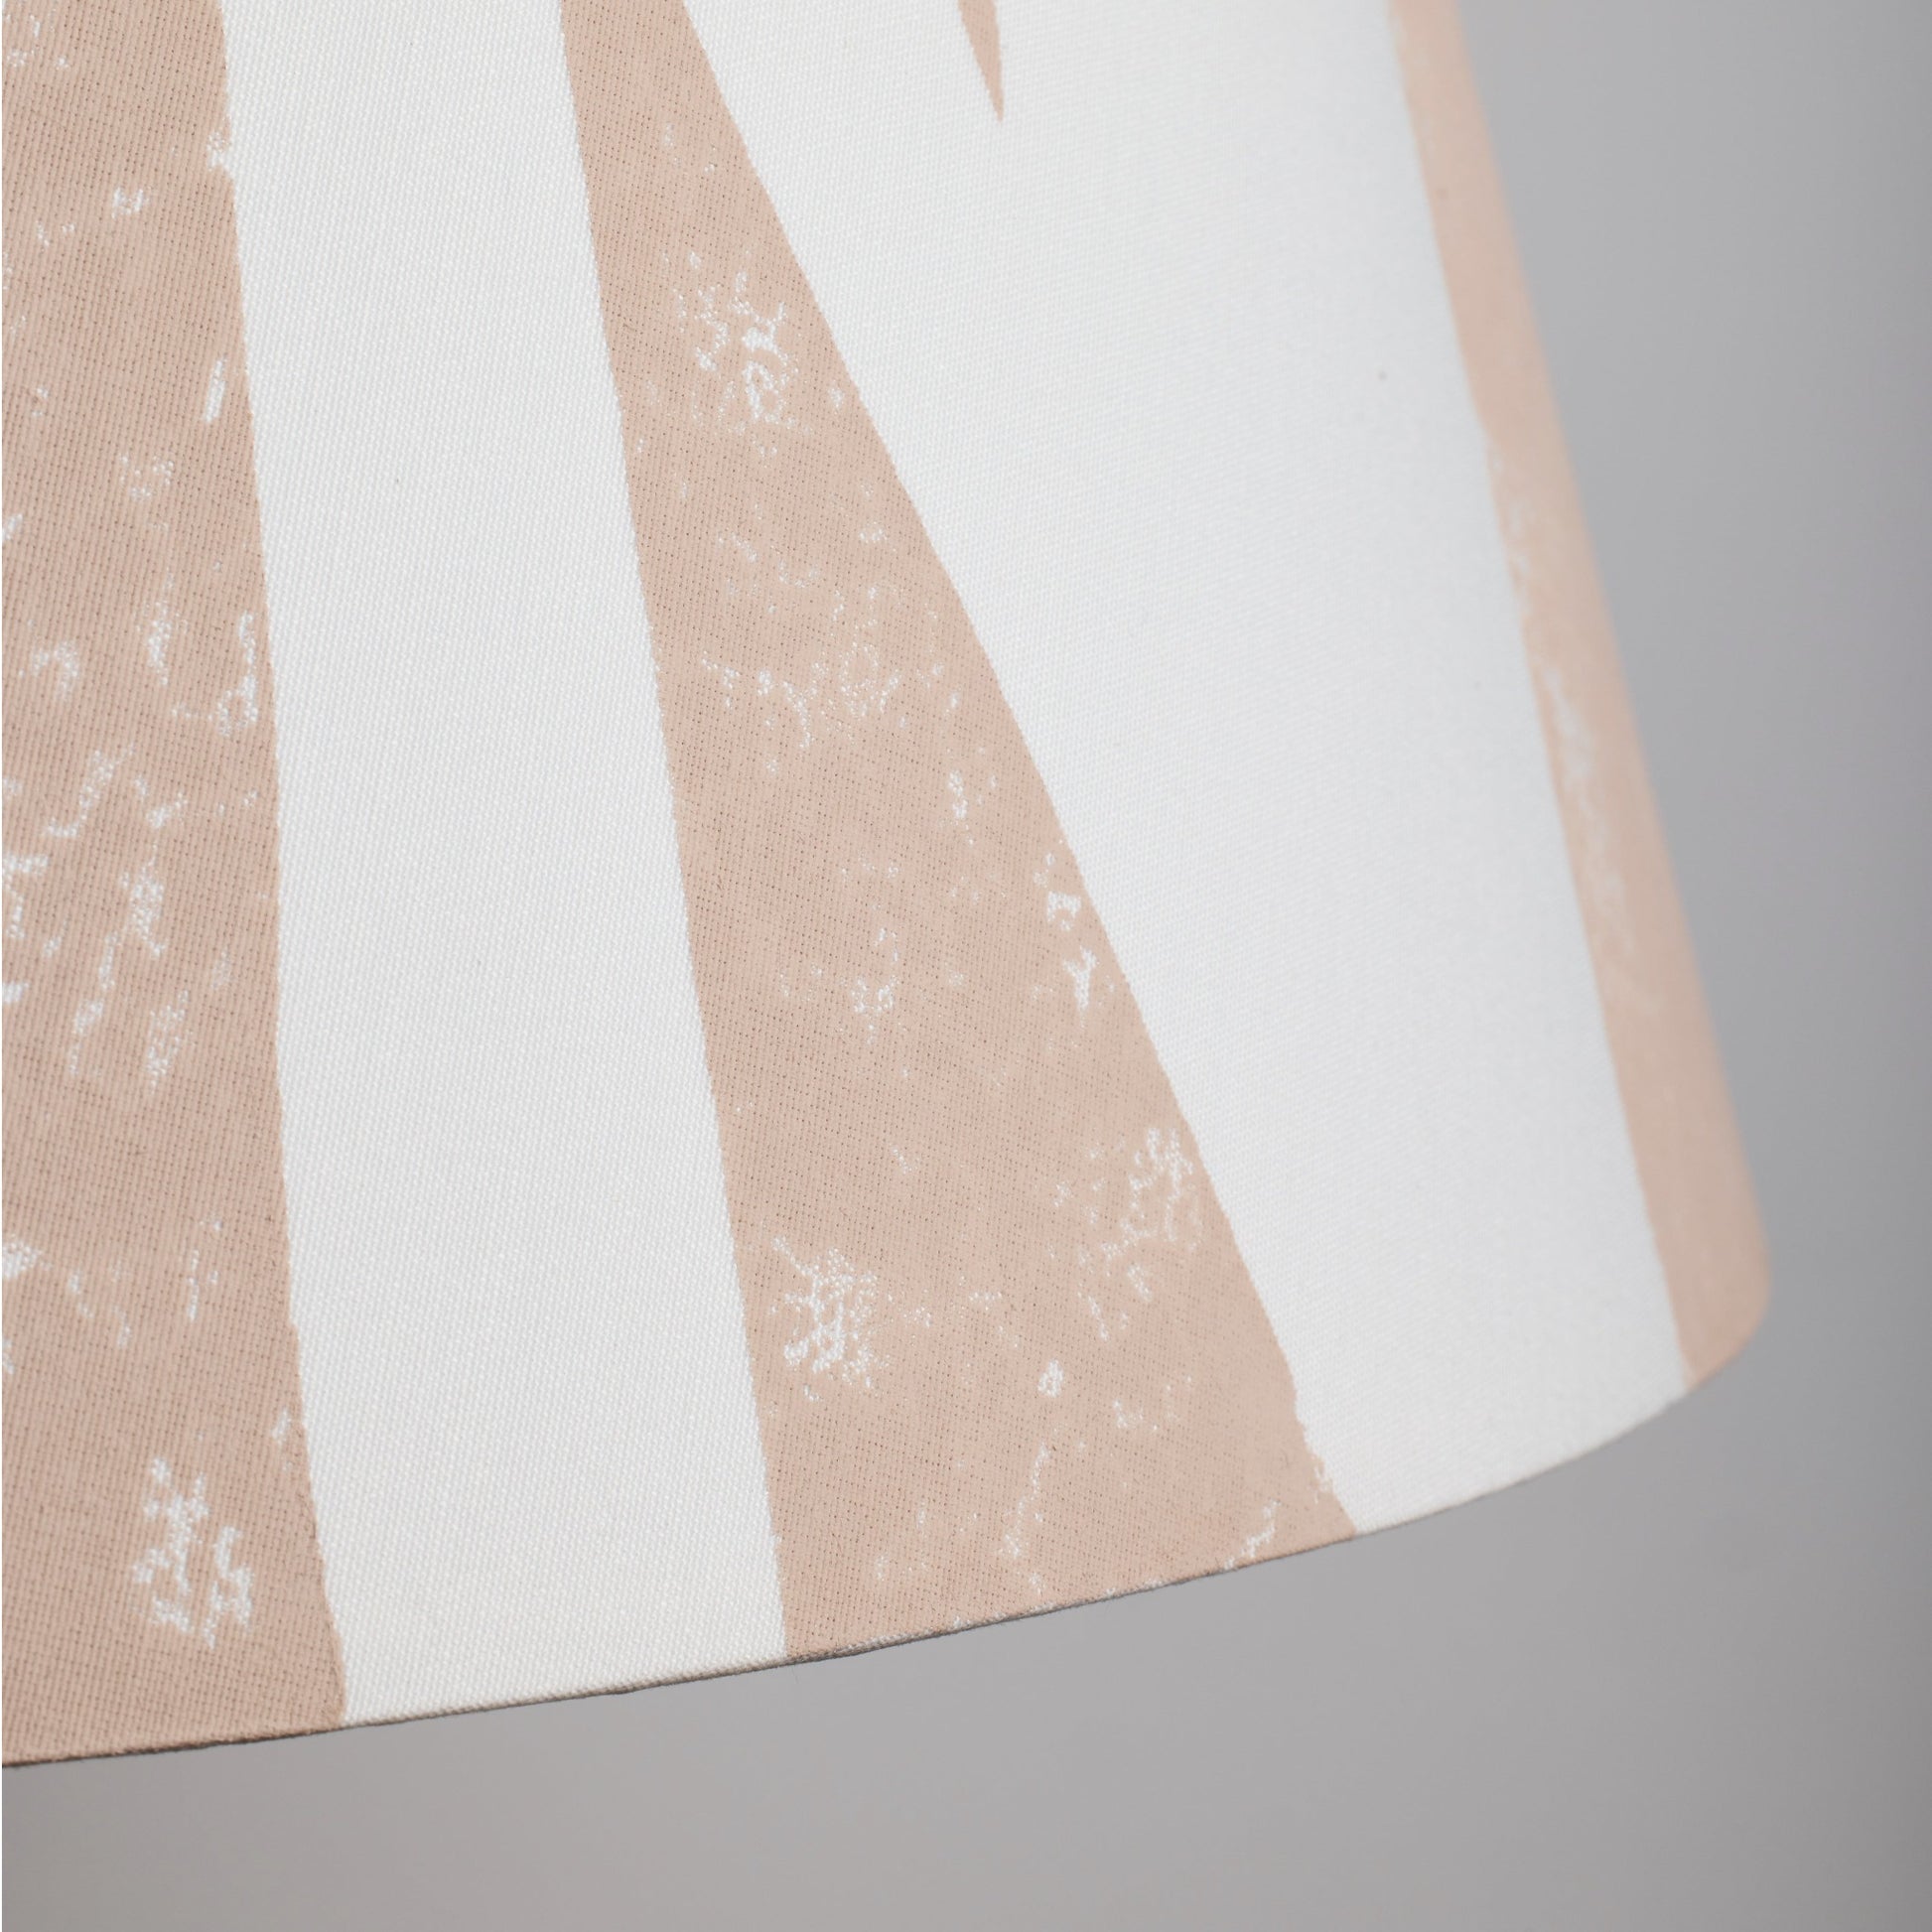 White lampshade with pink triangle pattern close up